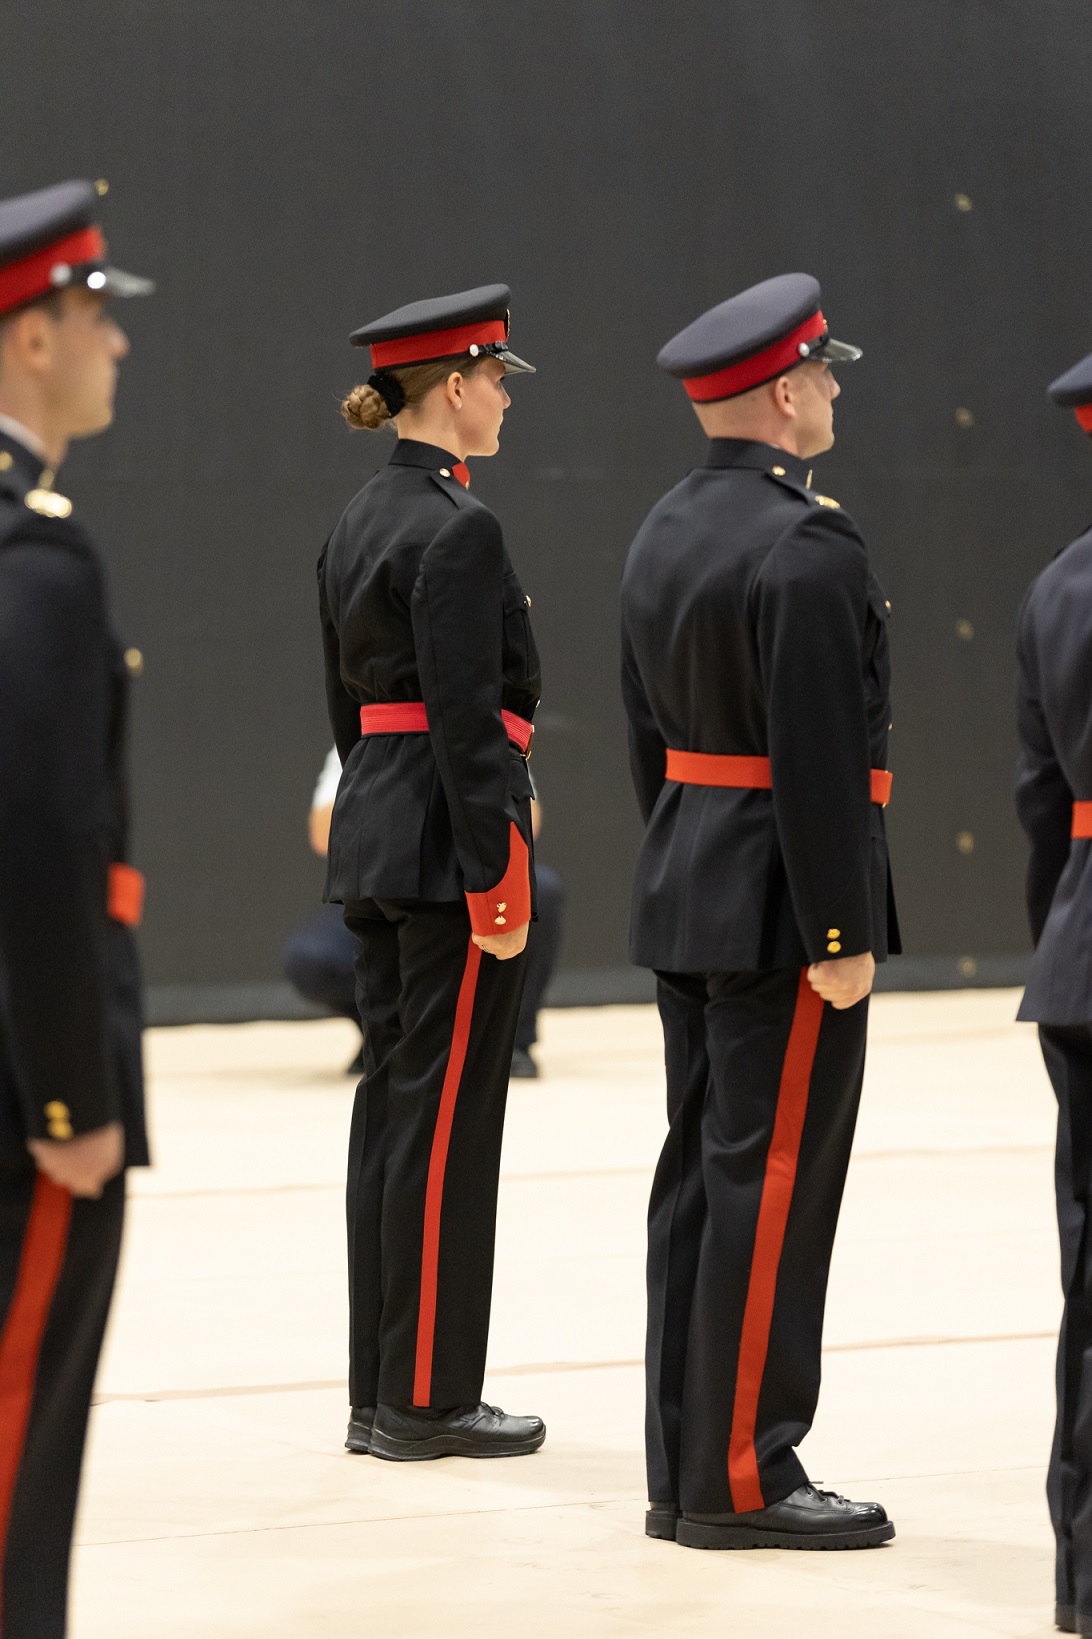 A group of police cadet graduates stand in line in uniform